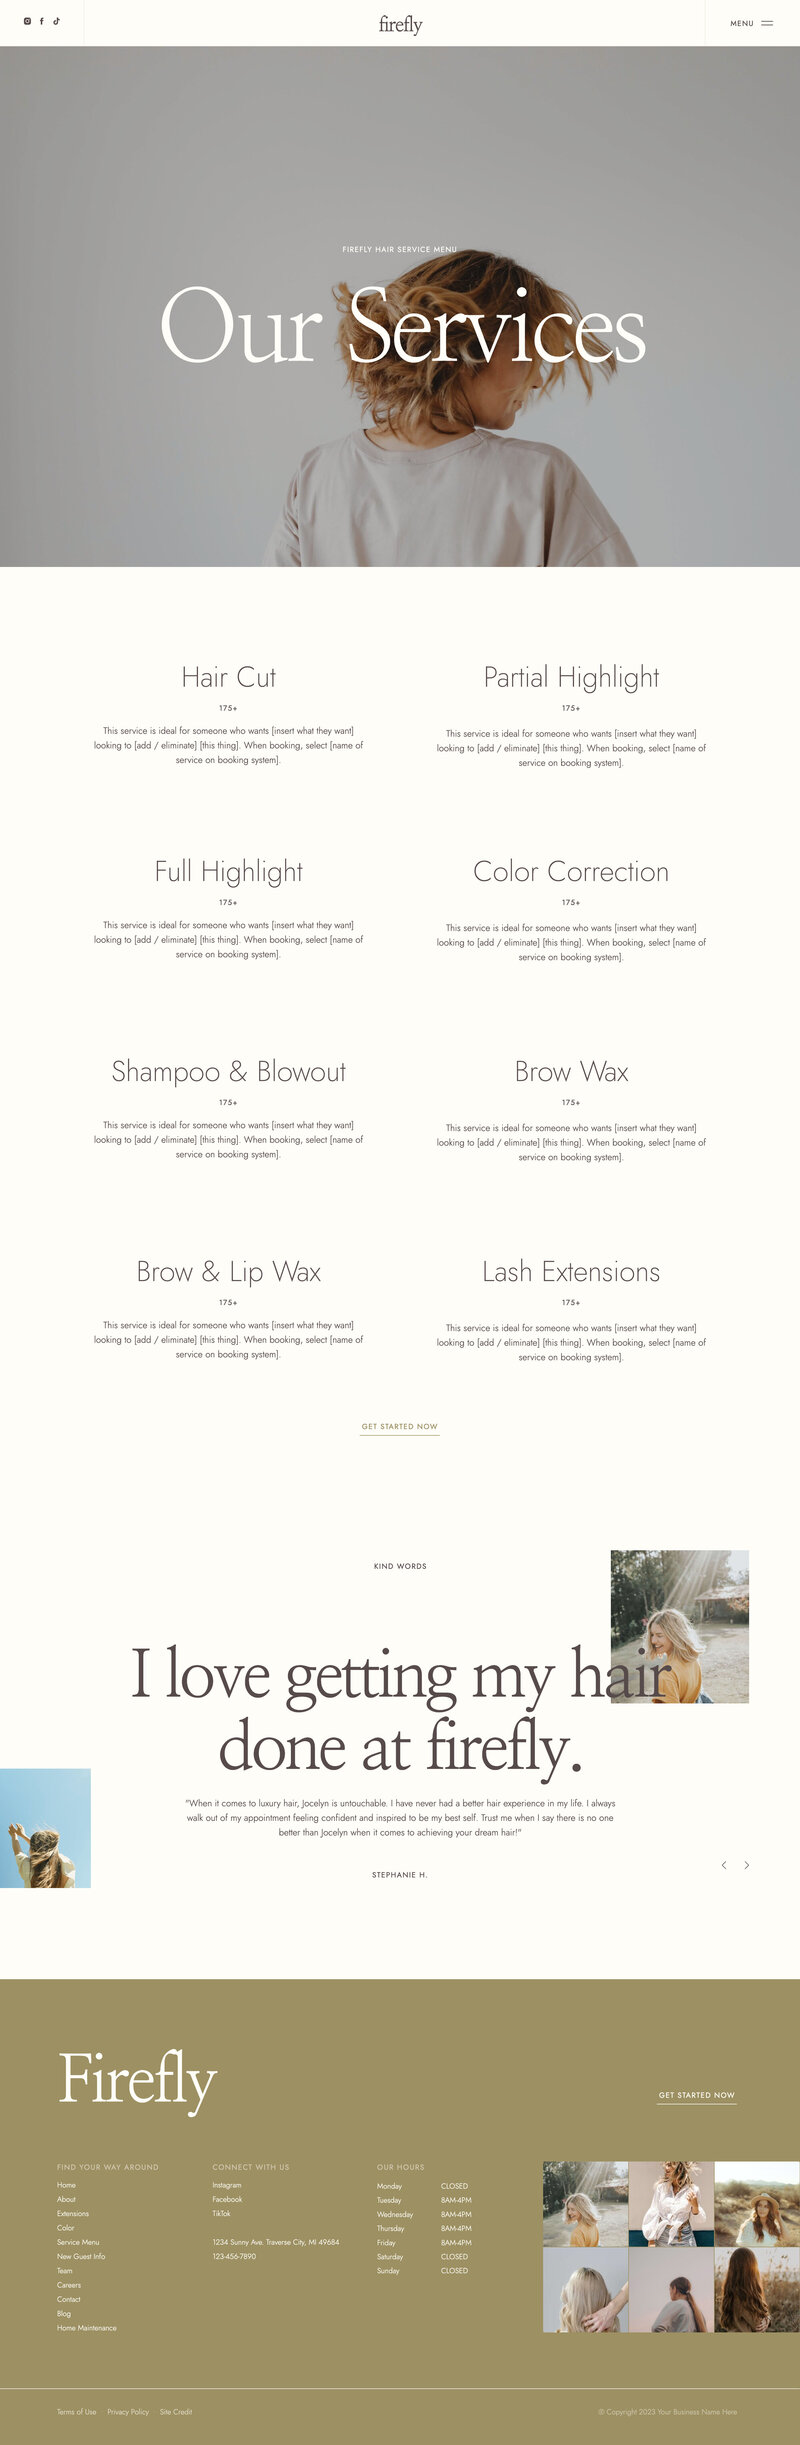 website-template-for-hair-stylists-salons-beauty-industry-firefly-franklin-and-willow--services-2023-07-06-18_48_48